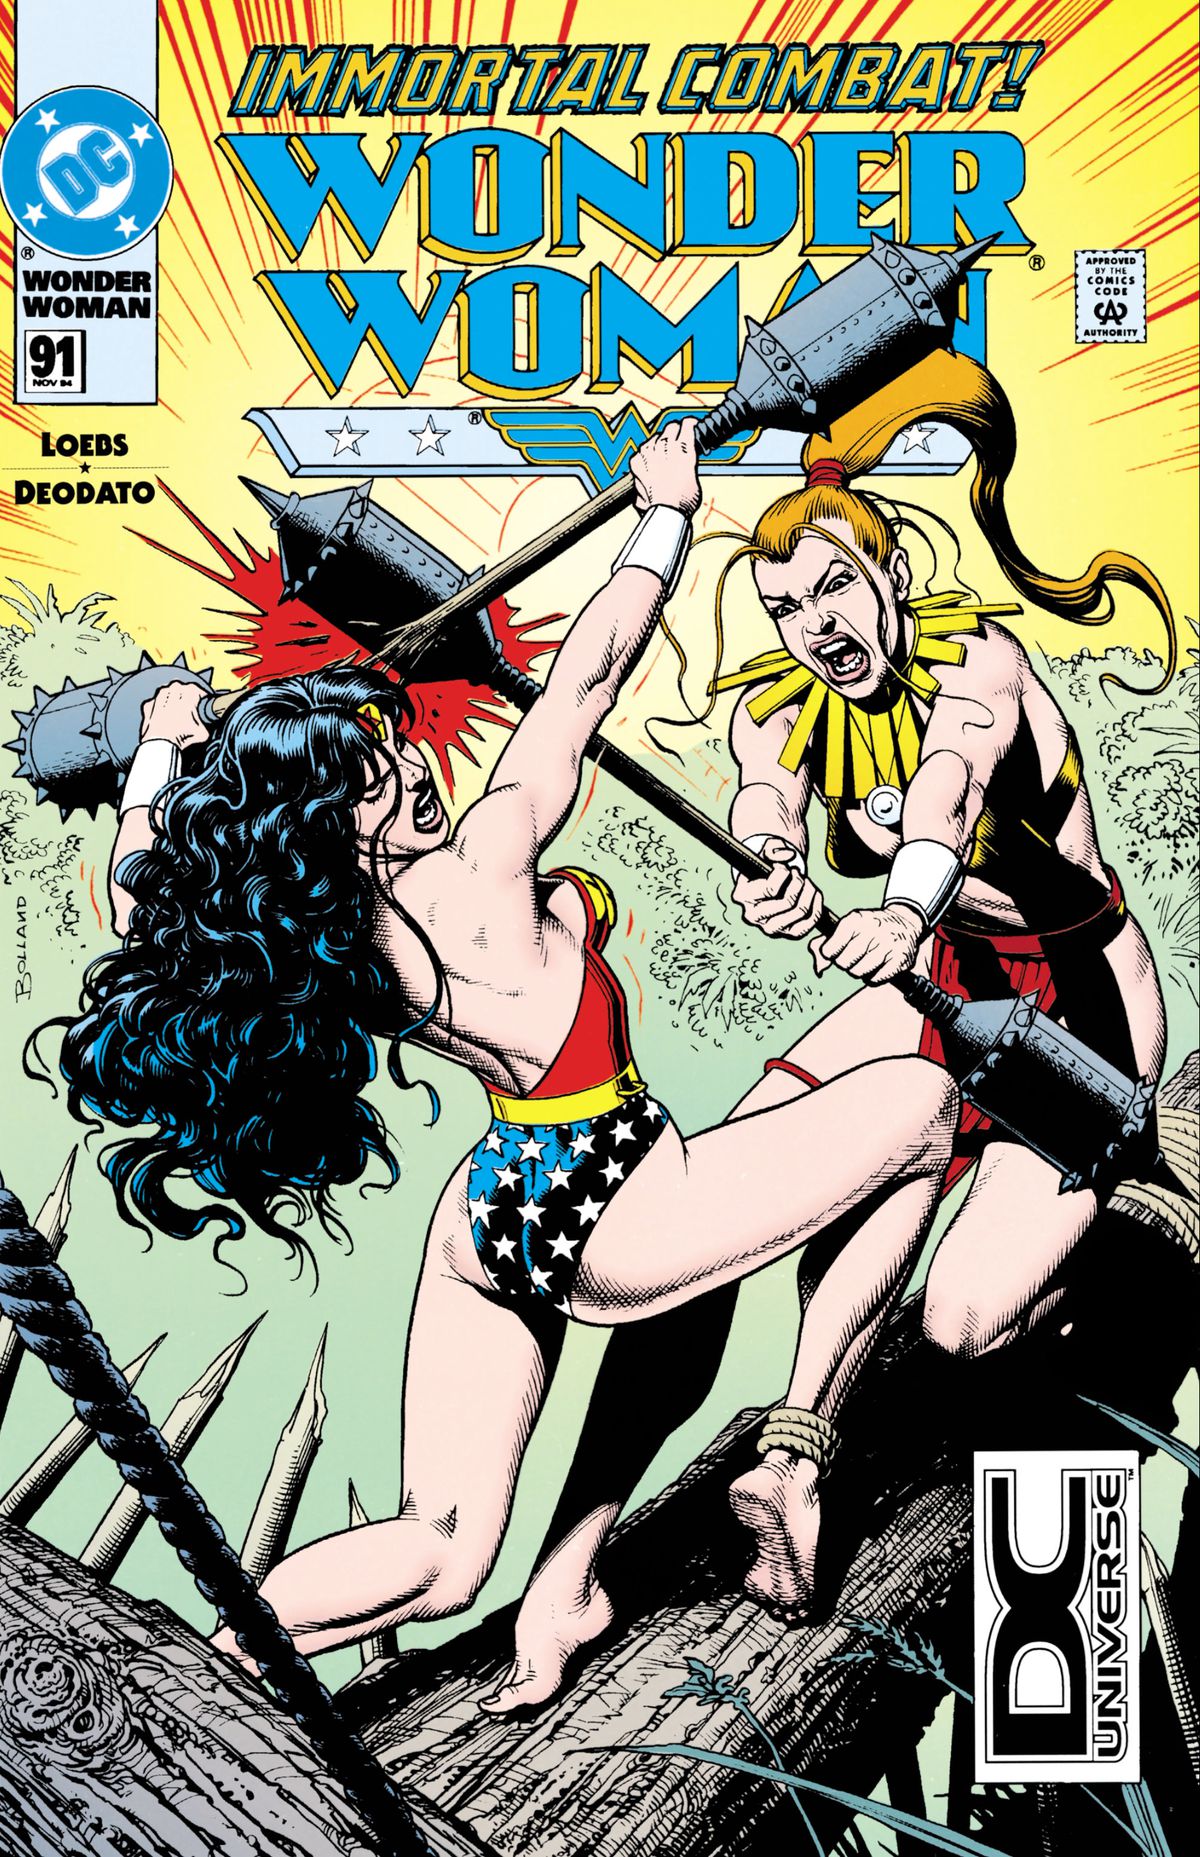 Wonder Woman and Artemis battle in gladiatorial style on the cover of Wonder Woman #91, DC Comics. 